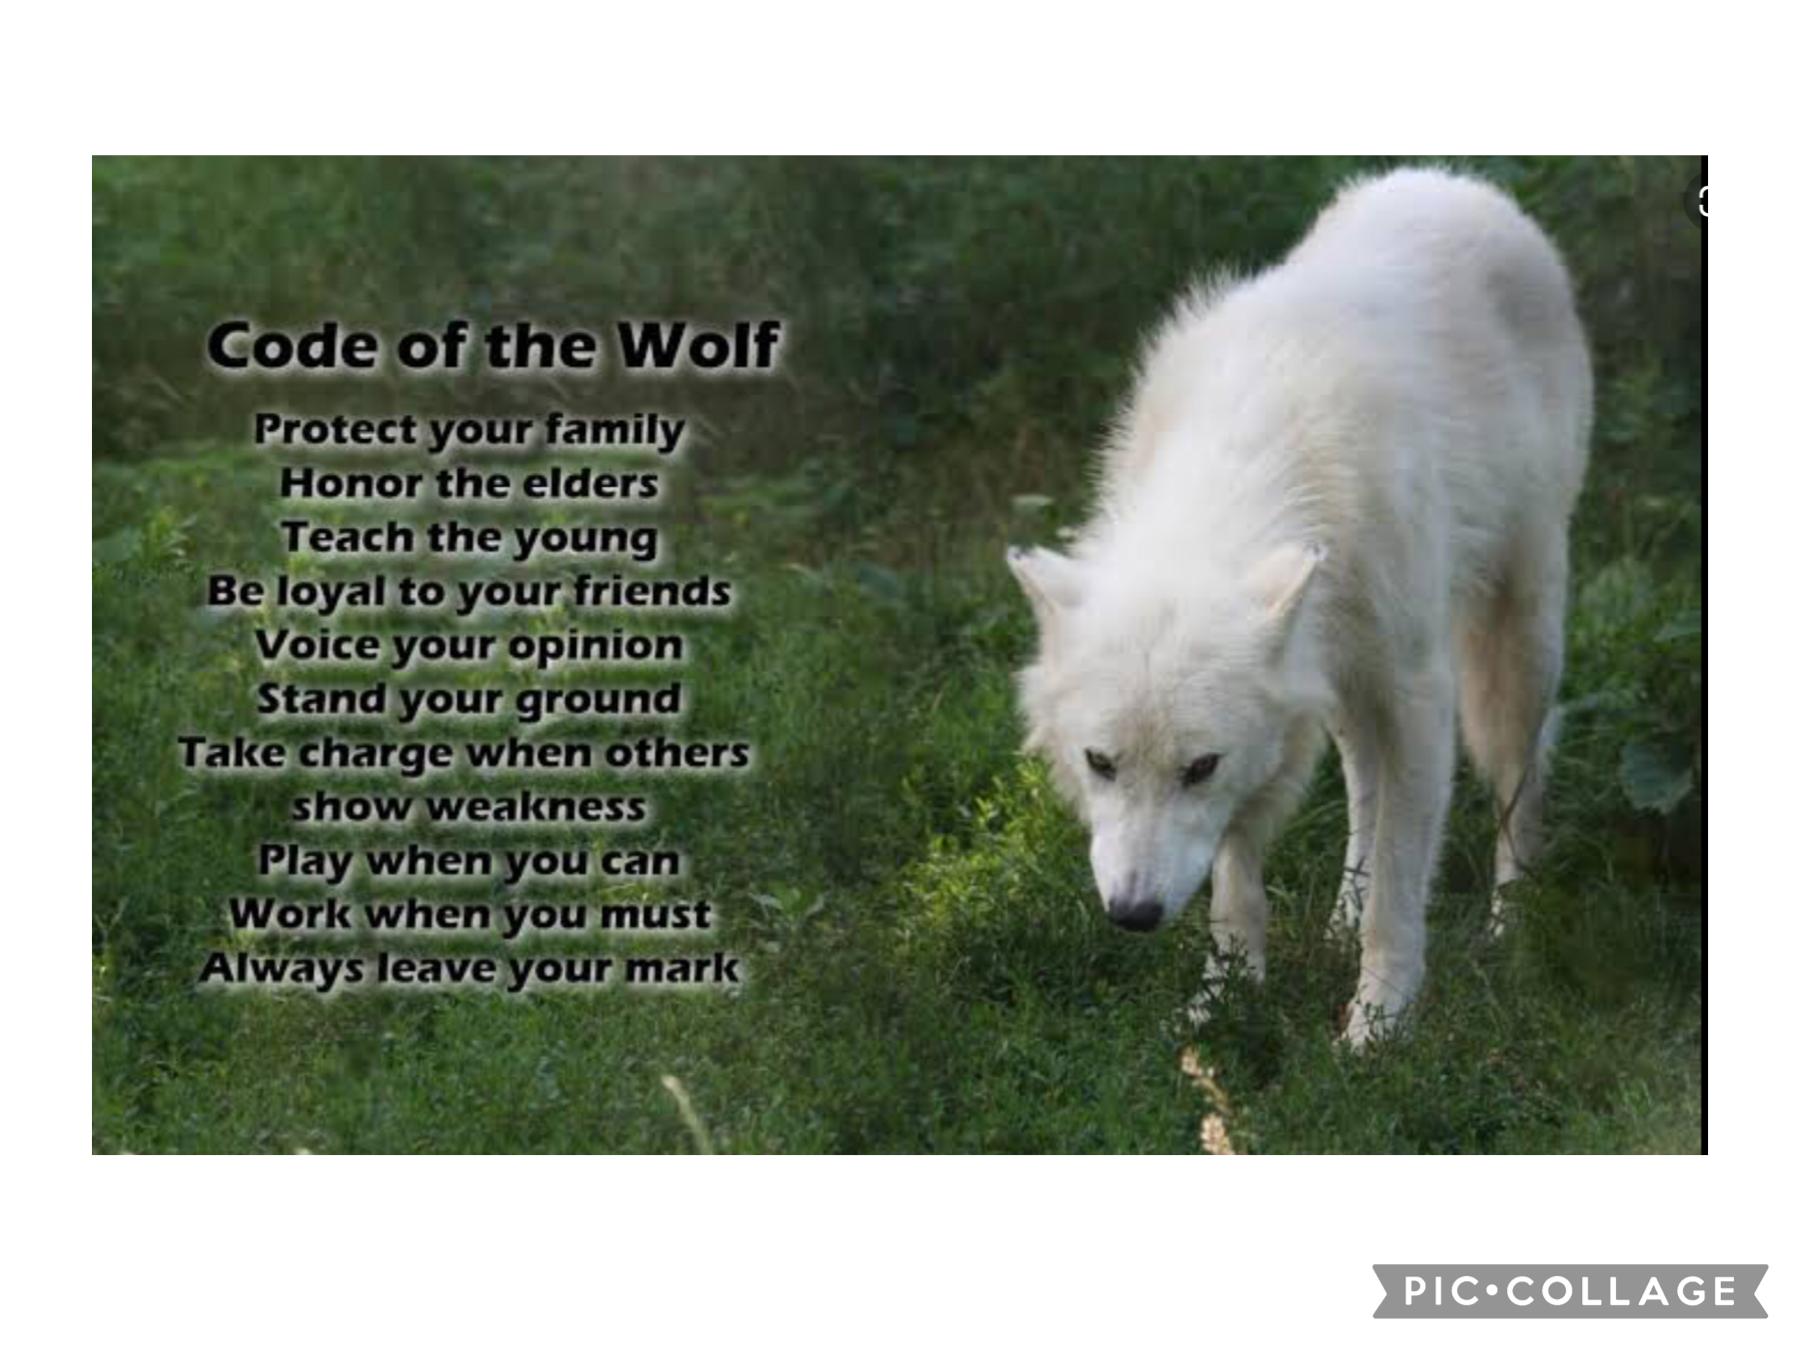 Code of the wolf